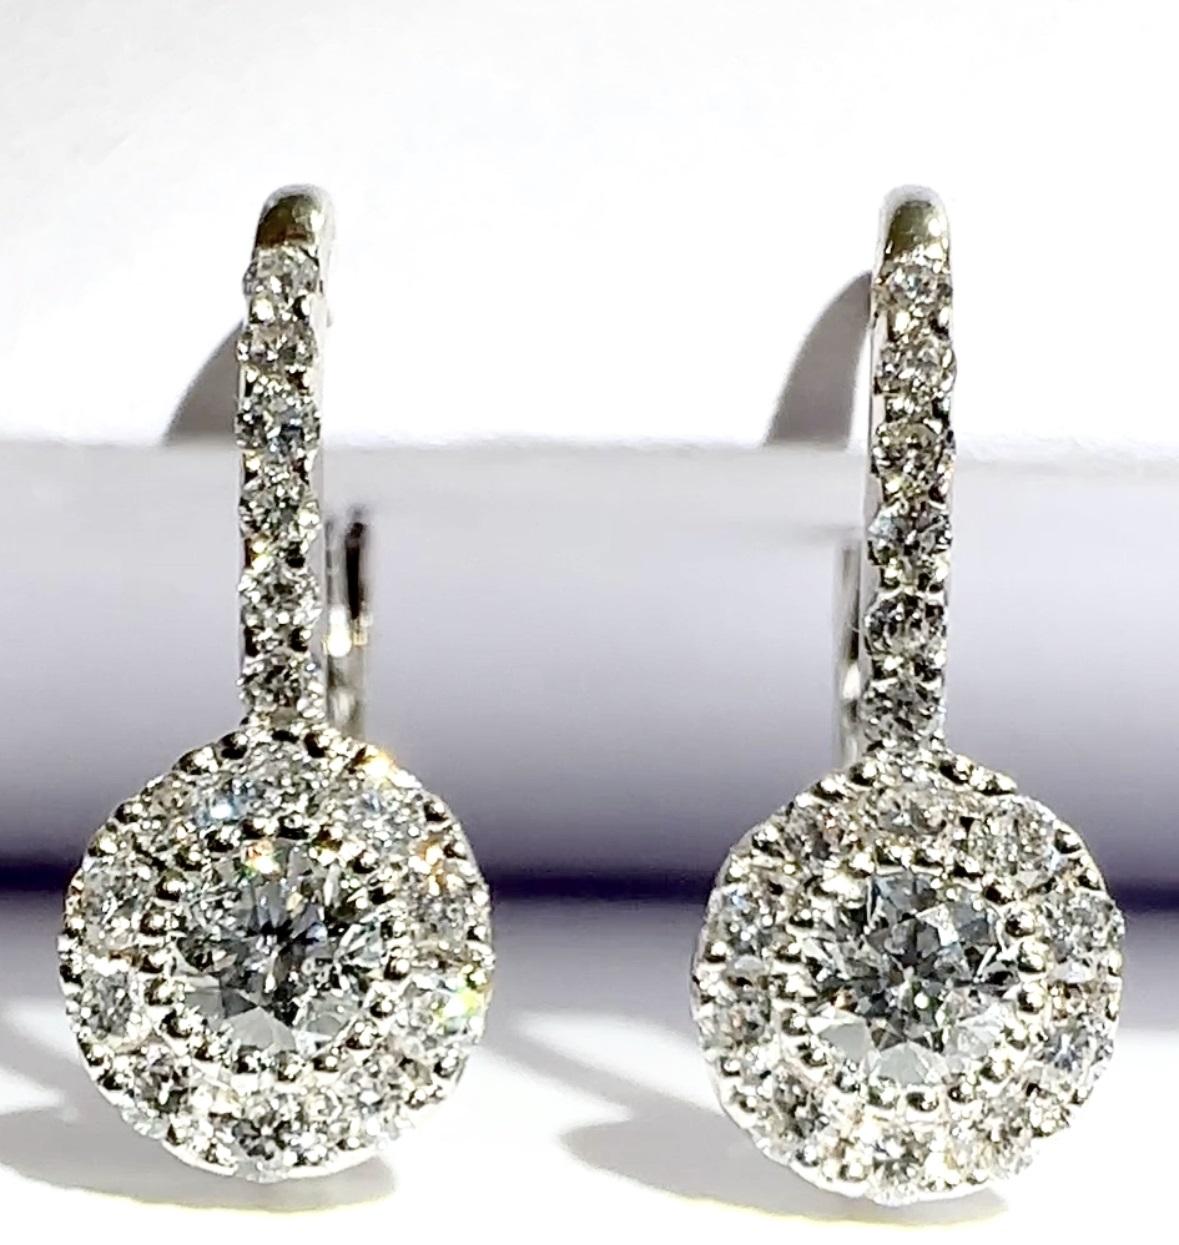 These earrings are just so sparkly and beautiful!  And because they are so bright and sparkling they were very hard for an ameteuer photographer like me to photograph and video.  I just want you to understand that they are so much more beautiful in